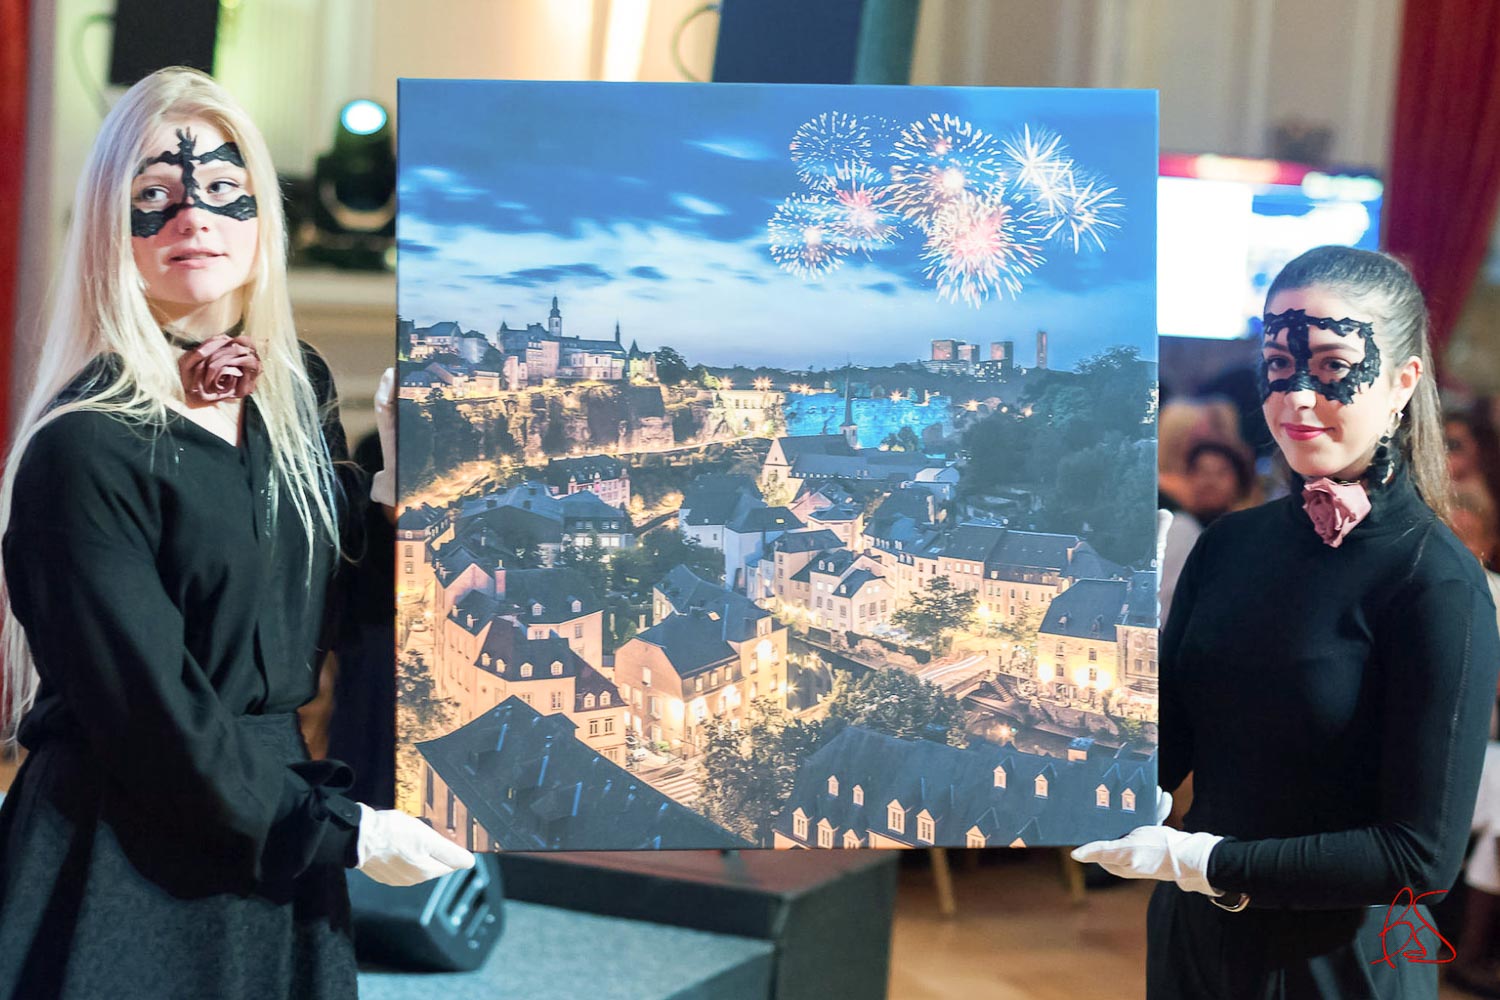 Make-A-Wish Luxembourg - Masquerade Gala and Auction 2017 at Cercle Cité in Luxembourg City - Live Auction - Rain and Fire fine art print by Christophe Van Biesen